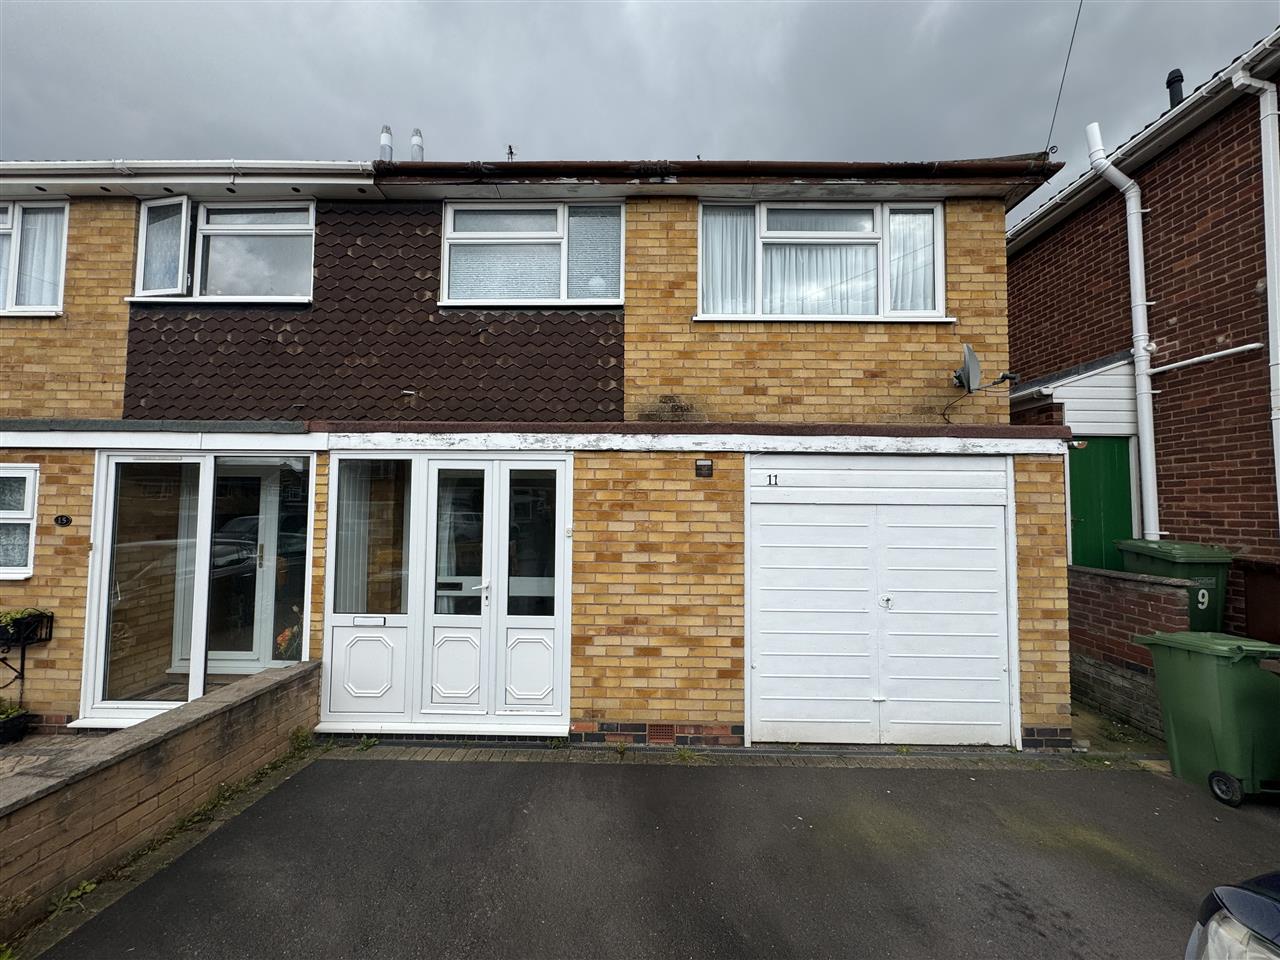 3 bed Semi-Detached House for rent in Bickenhill. From Partridge Homes - Yardley